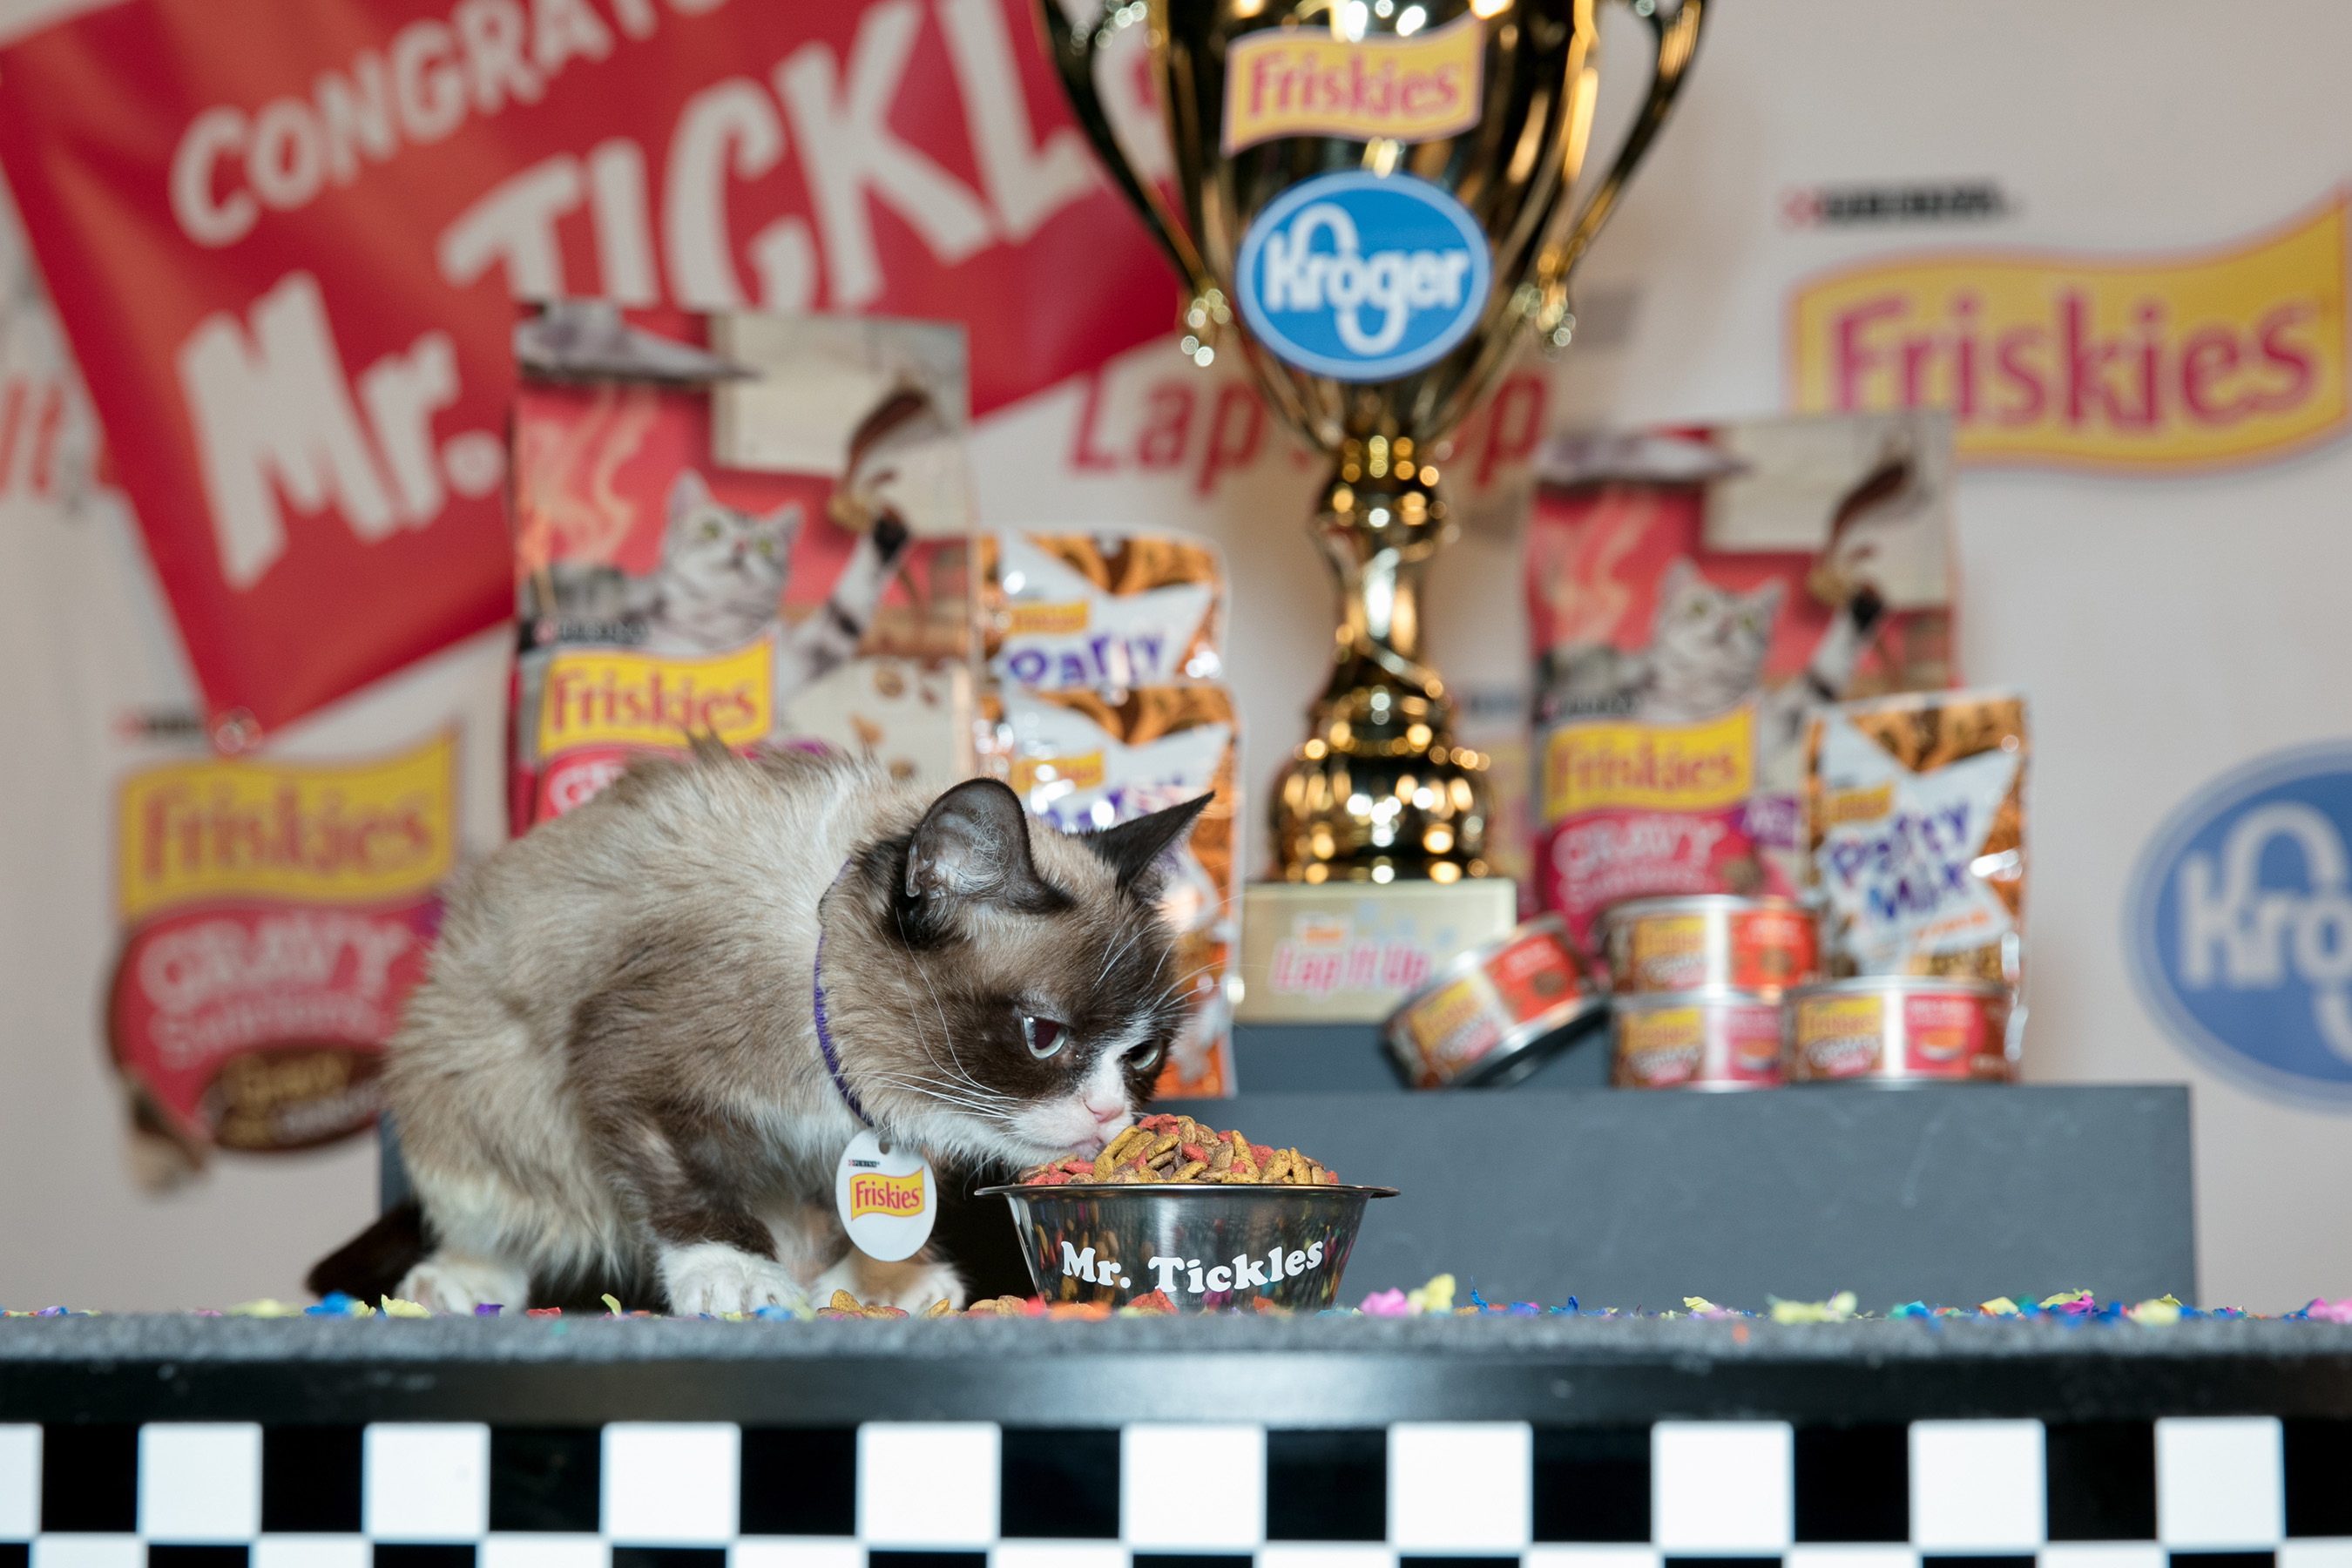 Grumpy Cat taste-tests Mr. Tickles' victory meal and enjoys it! Visit www.Kroger.com/Friskies to view the full video.